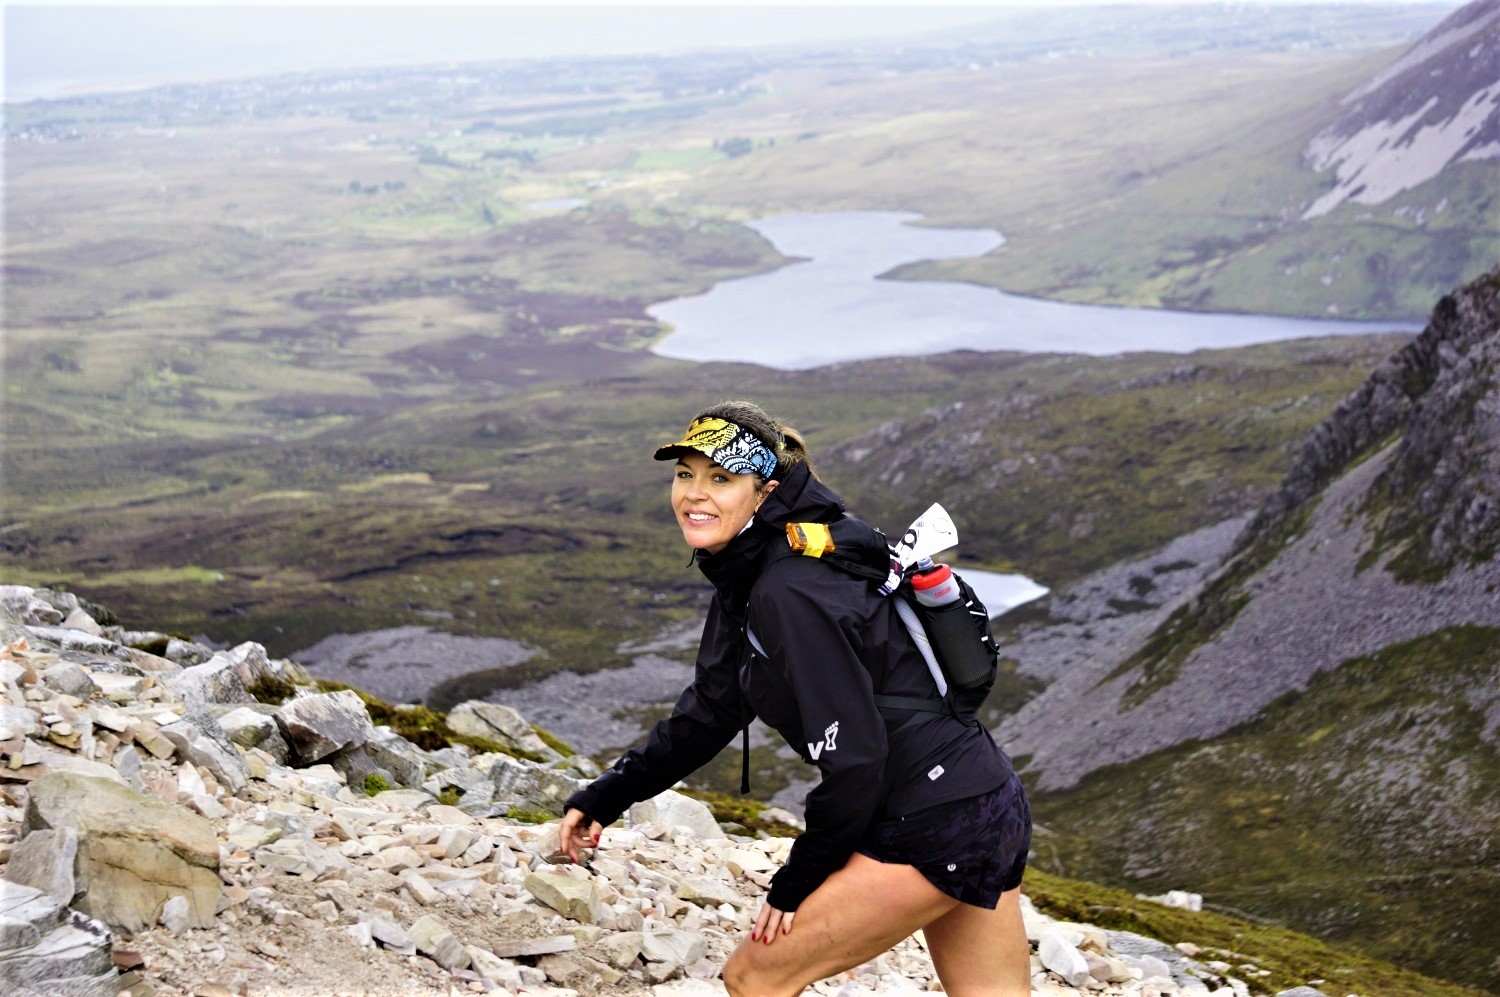 A female Seven Sisters participant ascending the scree slopes of Errigal as part of the 30km race.